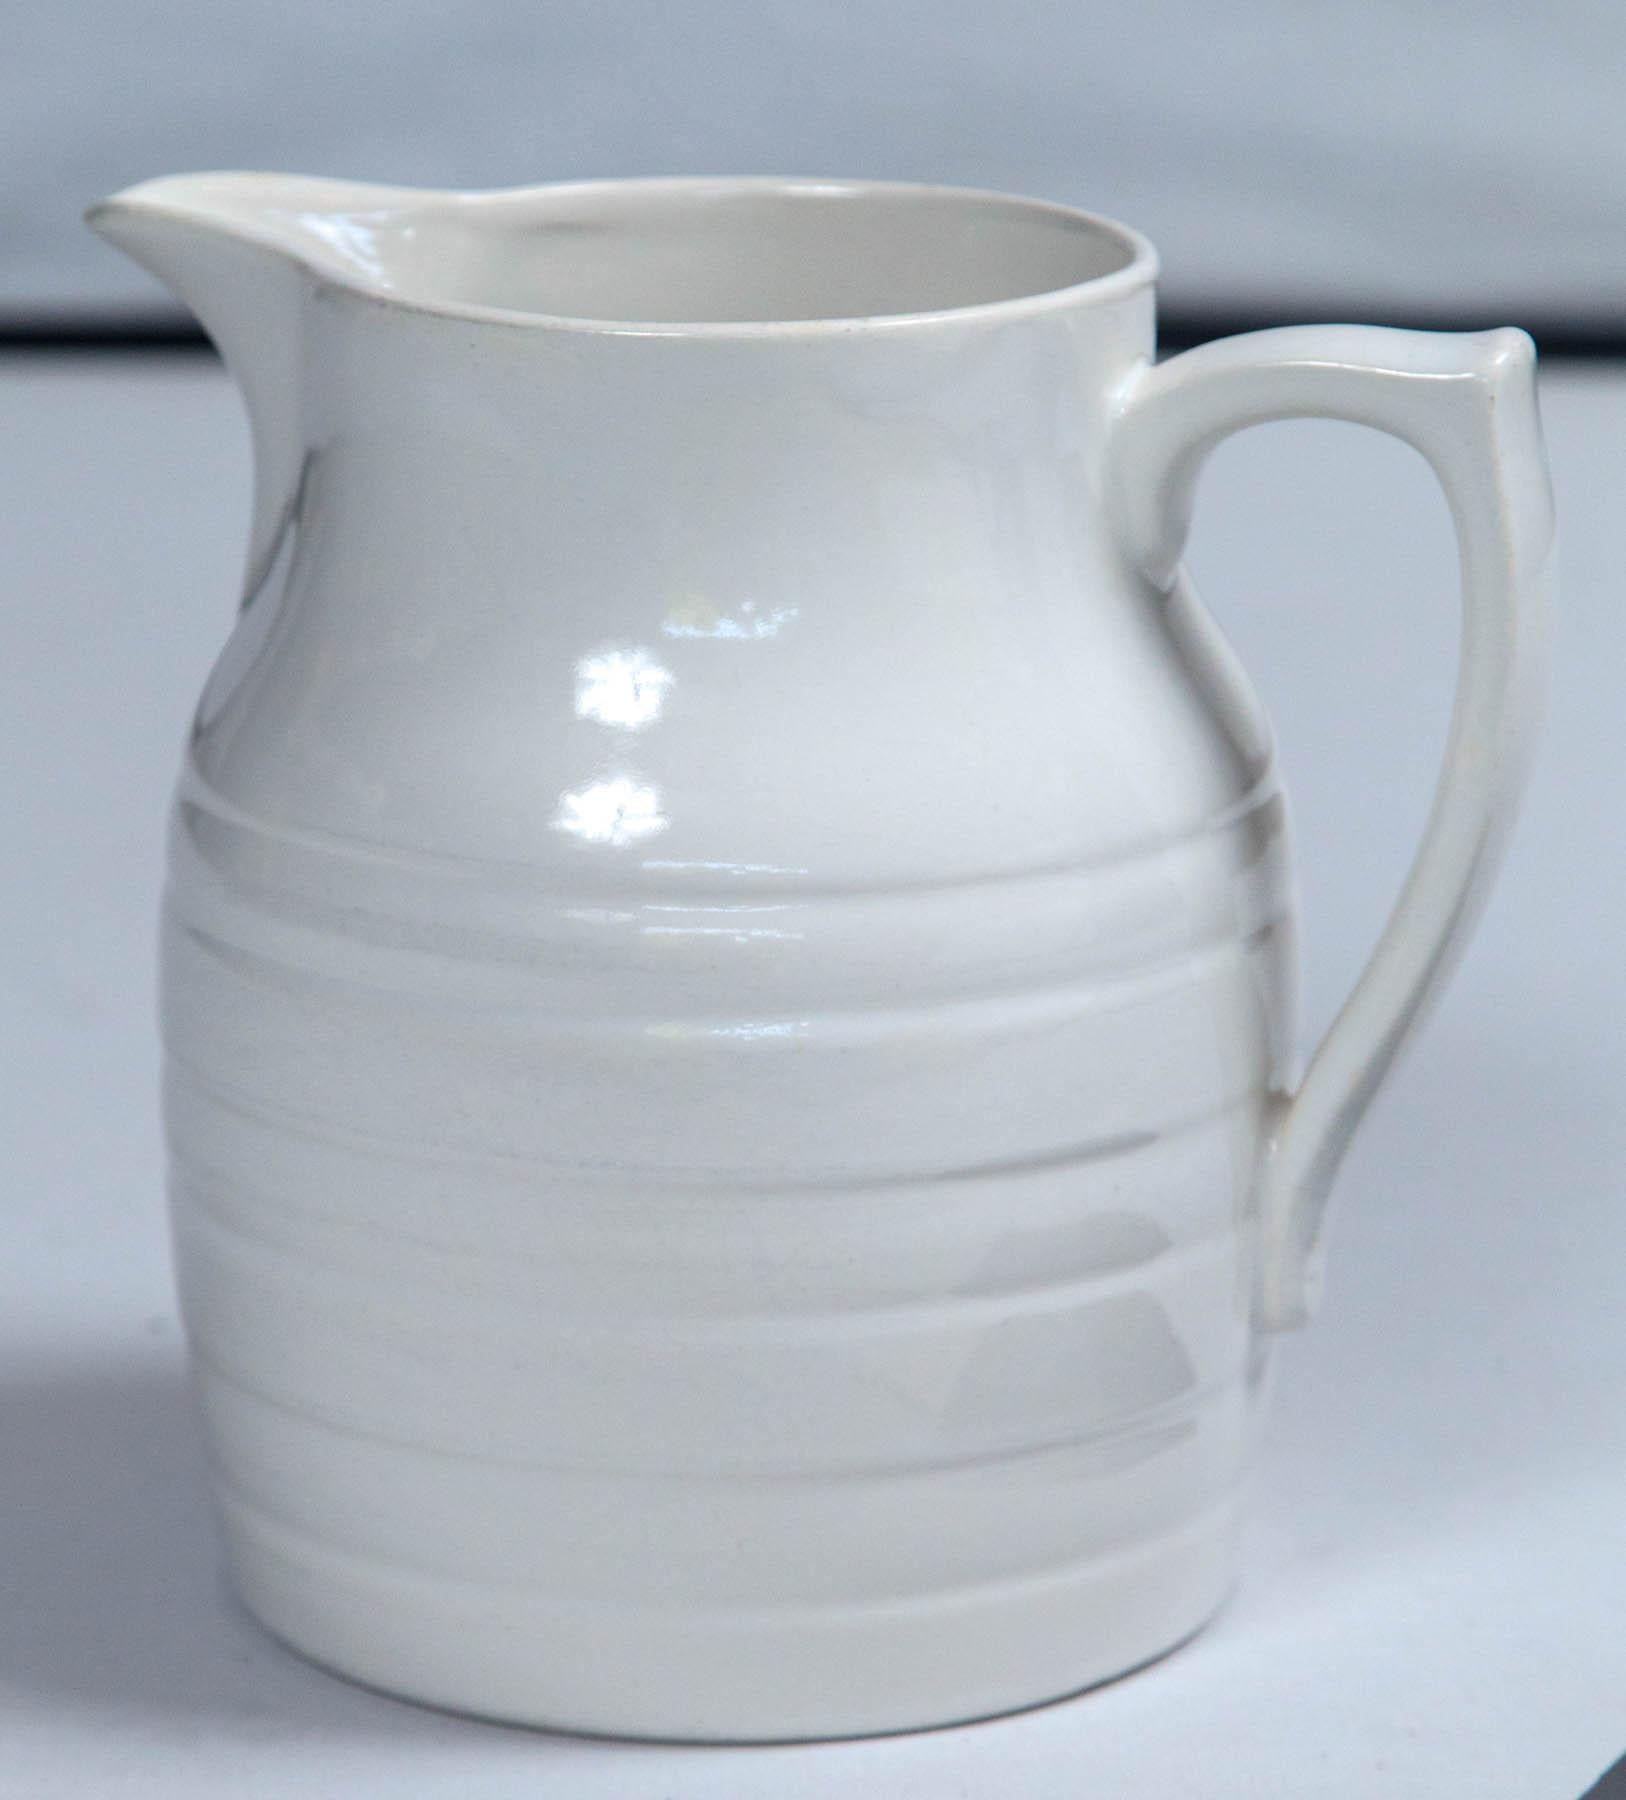 English ironstone dairy pitcher, circa 1920. Extra large size, classic vintage form. Manufactured by Sadler, Staffordshire, England.



 